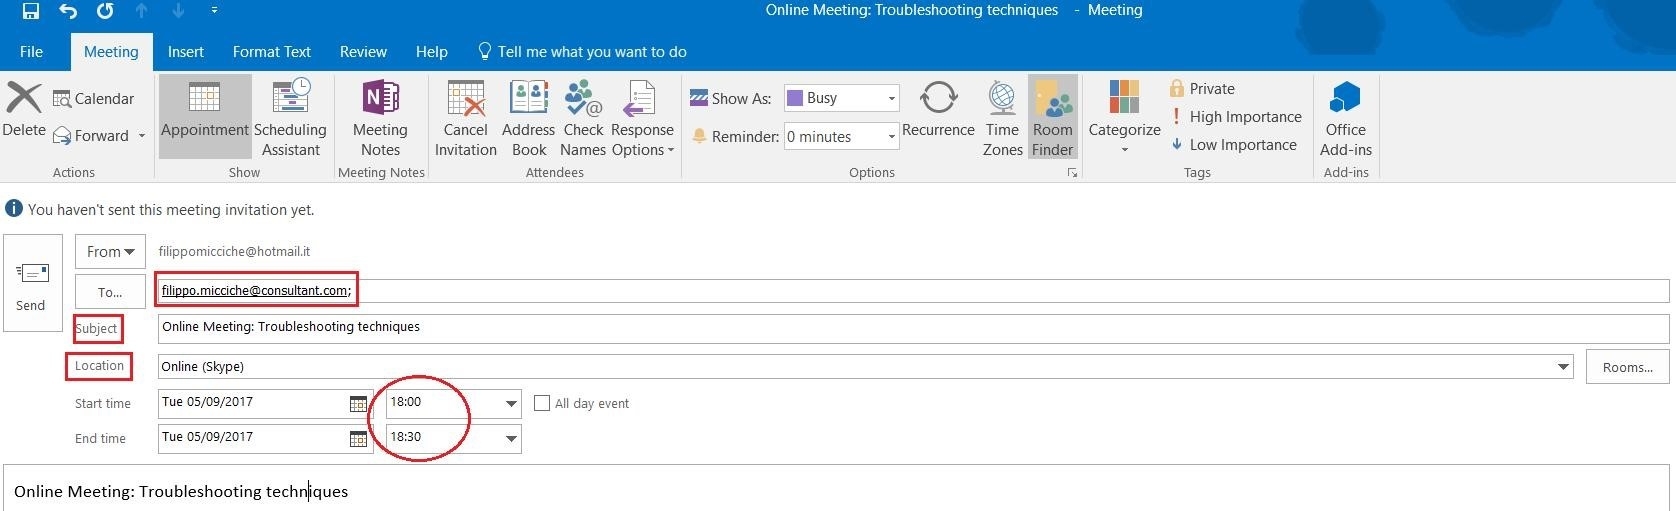 Outlook Calendars: Are You Getting The Most Out Of Yours? | Sherweb Calendar Printing Assistant Alternative